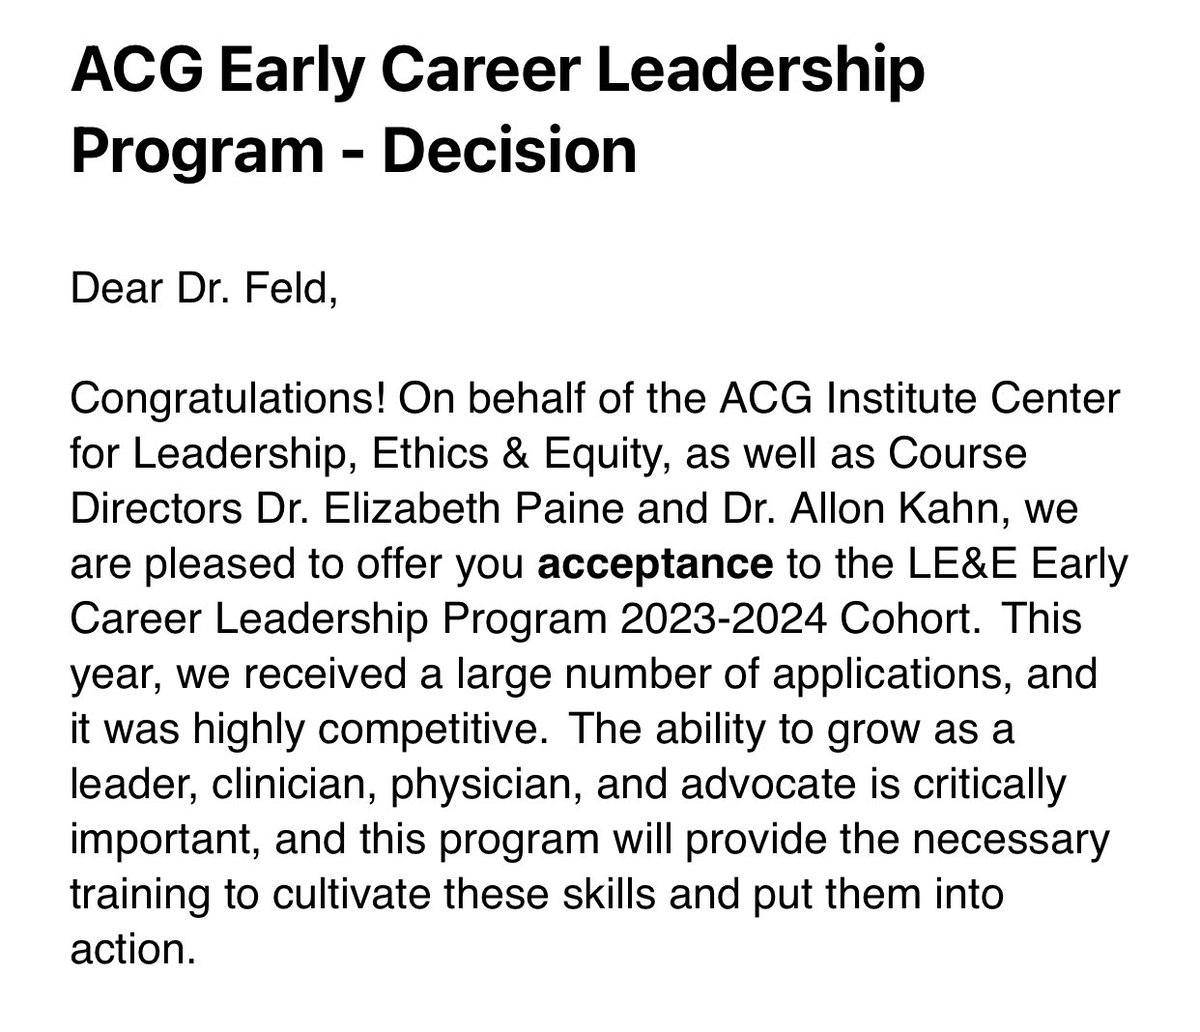 Huge thanks to @AmyOxentenkoMD for nominating me & so much gratitude to @NeenaSAbrahamMD @AllonKahn #ElizabethPaine @AmCollegeGastro for the incredible opportunity to participate in the #ACGInstitute Early Career Leadership Program!

#LEECenter #ECLP

🙏🥹🙏